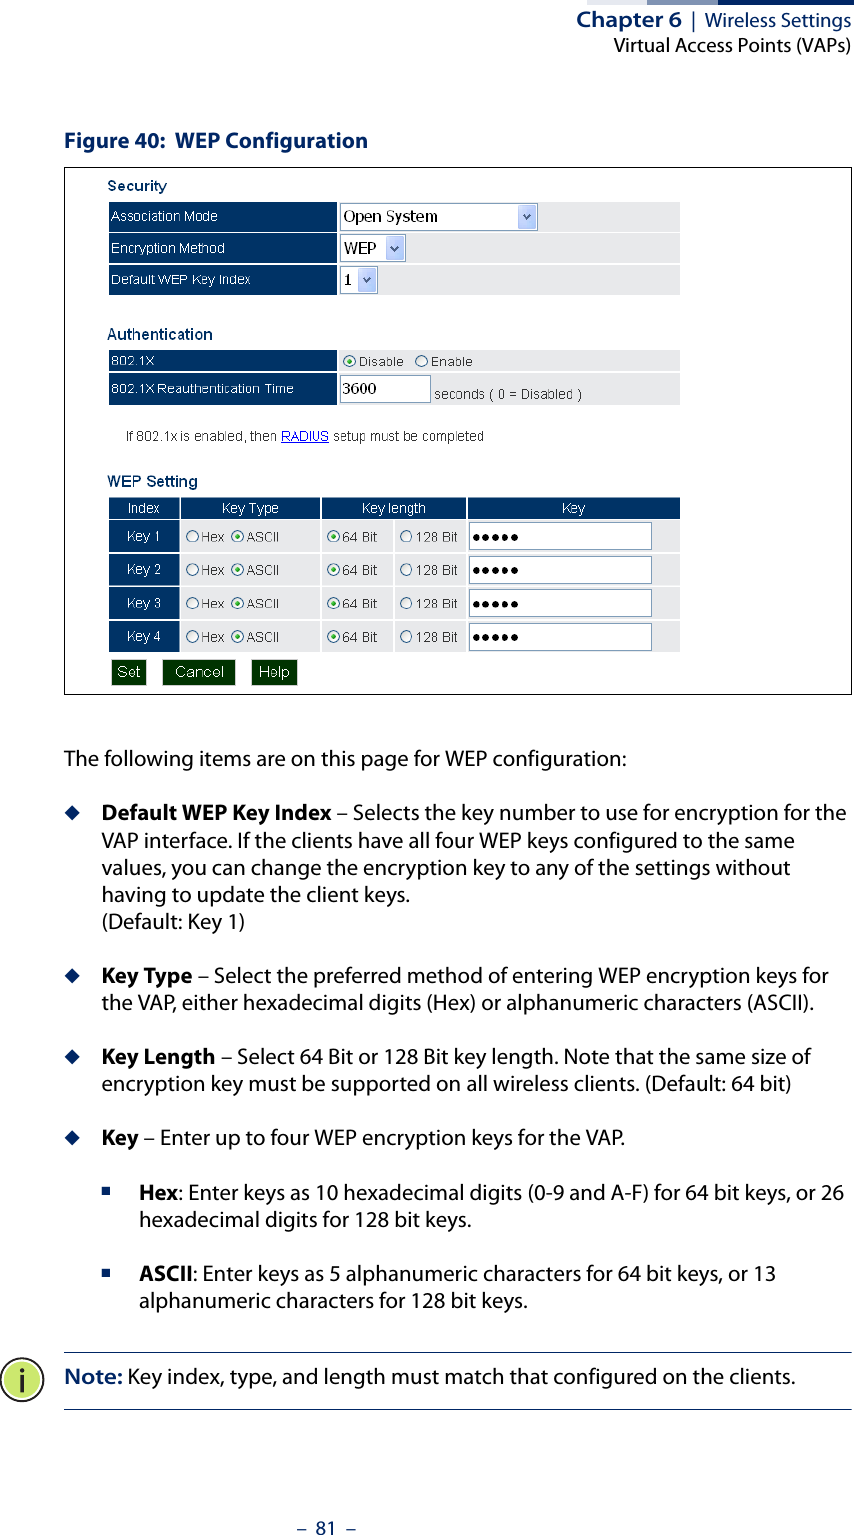 Chapter 6  |  Wireless SettingsVirtual Access Points (VAPs)–  81  –Figure 40:  WEP ConfigurationThe following items are on this page for WEP configuration:◆Default WEP Key Index – Selects the key number to use for encryption for the VAP interface. If the clients have all four WEP keys configured to the same values, you can change the encryption key to any of the settings without having to update the client keys. (Default: Key 1)◆Key Type – Select the preferred method of entering WEP encryption keys for the VAP, either hexadecimal digits (Hex) or alphanumeric characters (ASCII).◆Key Length – Select 64 Bit or 128 Bit key length. Note that the same size of encryption key must be supported on all wireless clients. (Default: 64 bit)◆Key – Enter up to four WEP encryption keys for the VAP.■Hex: Enter keys as 10 hexadecimal digits (0-9 and A-F) for 64 bit keys, or 26 hexadecimal digits for 128 bit keys.■ASCII: Enter keys as 5 alphanumeric characters for 64 bit keys, or 13 alphanumeric characters for 128 bit keys.Note: Key index, type, and length must match that configured on the clients.